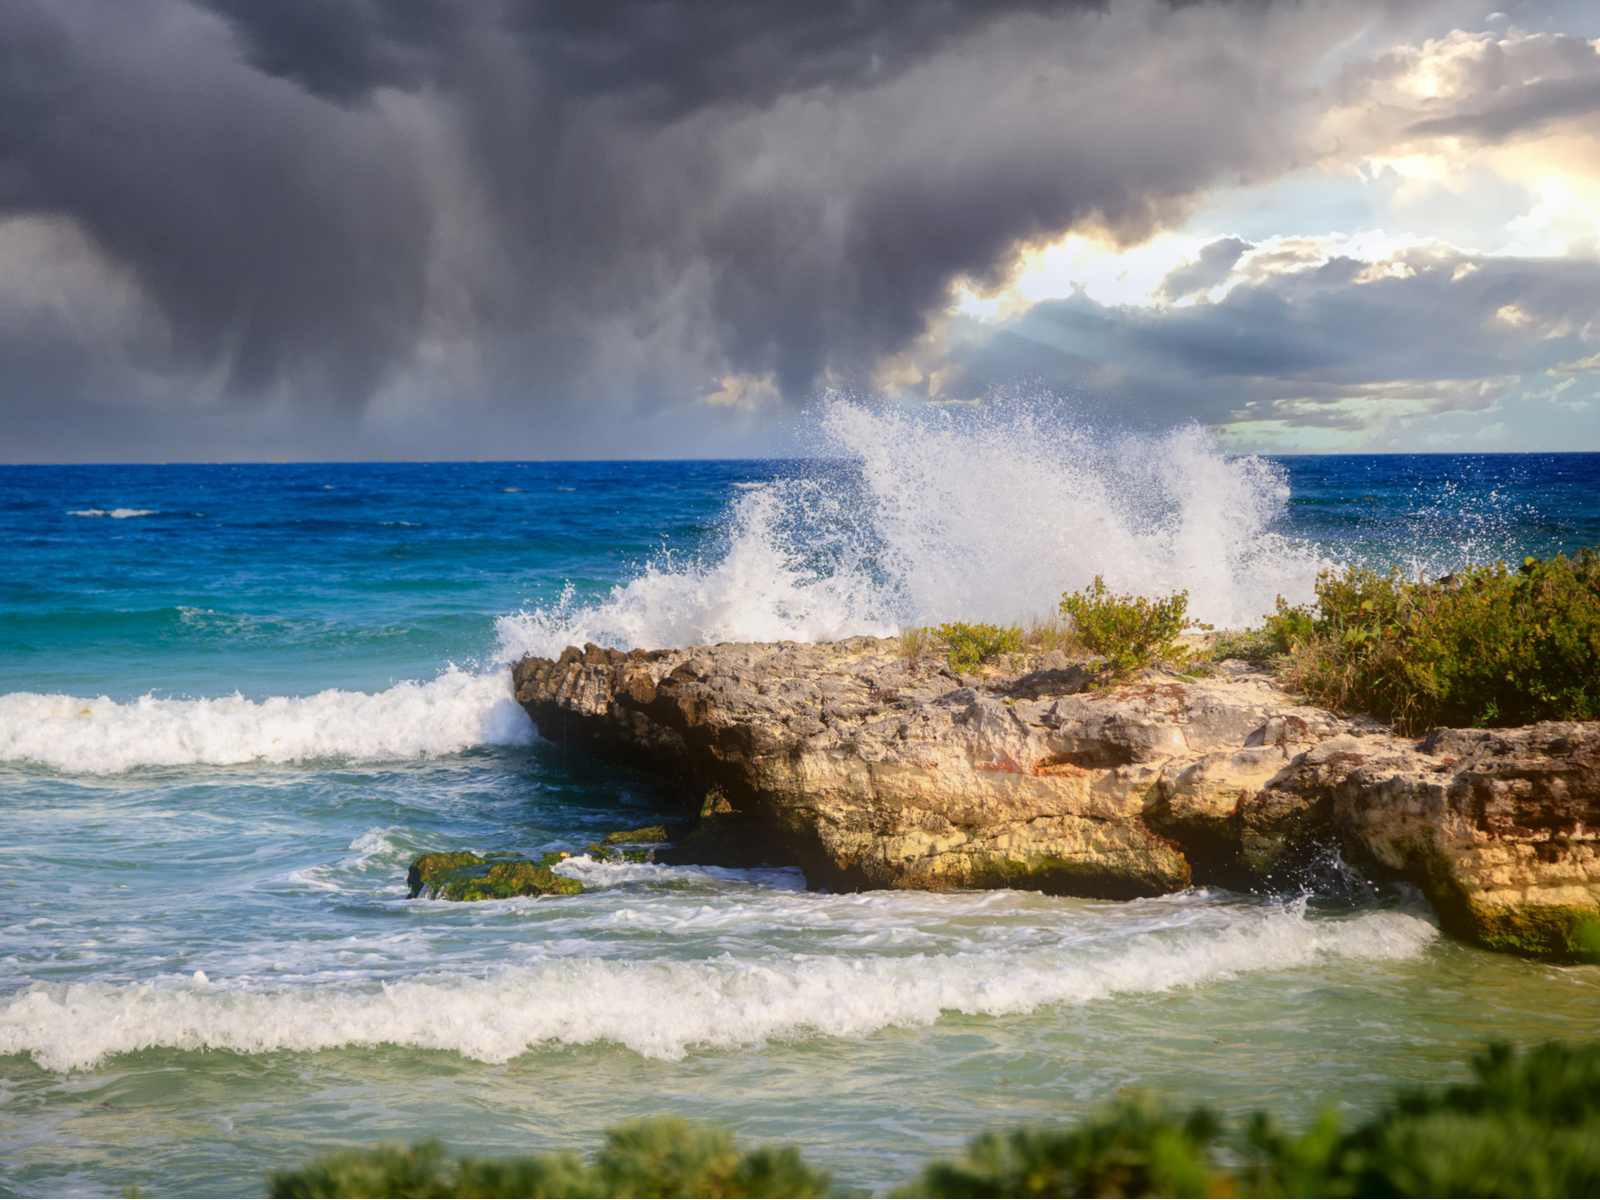 Storm clouds rolling in of the rocky coast during the best time to visit Tulum